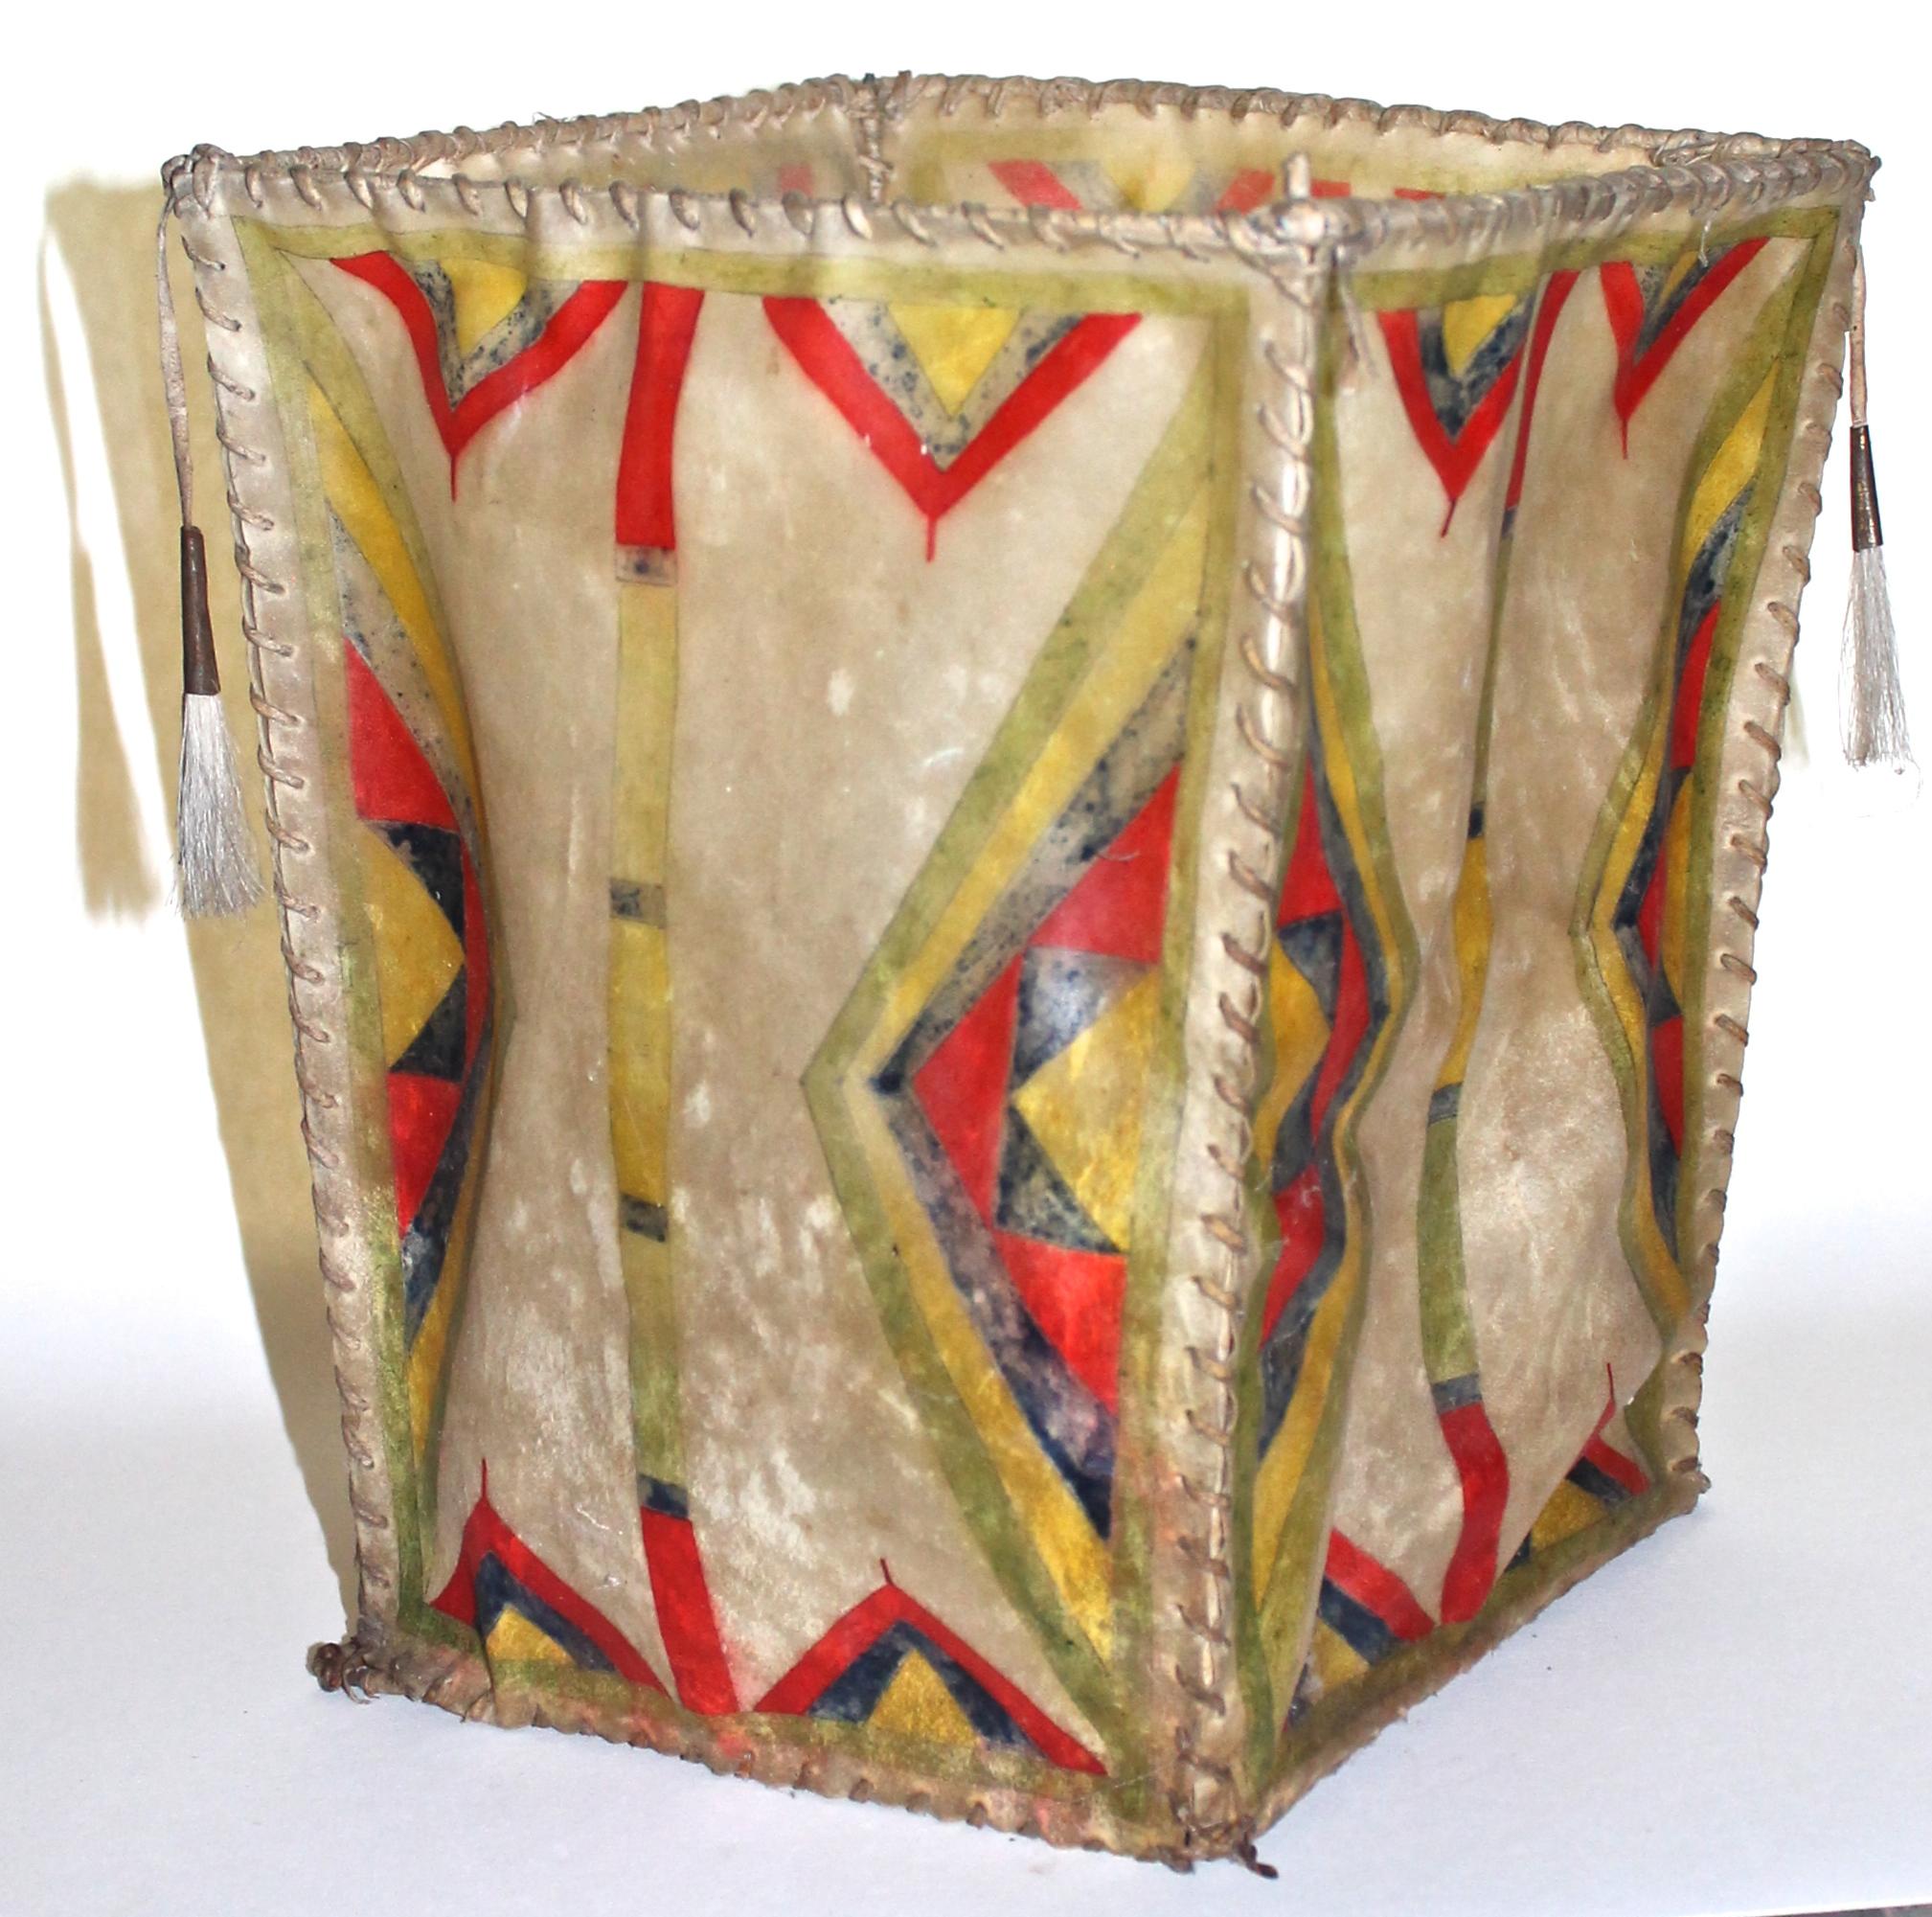 An open truncated basket constructed of wire with rawhide sides, painted with geometric motifs in natural paints. Tassels, held with brass.